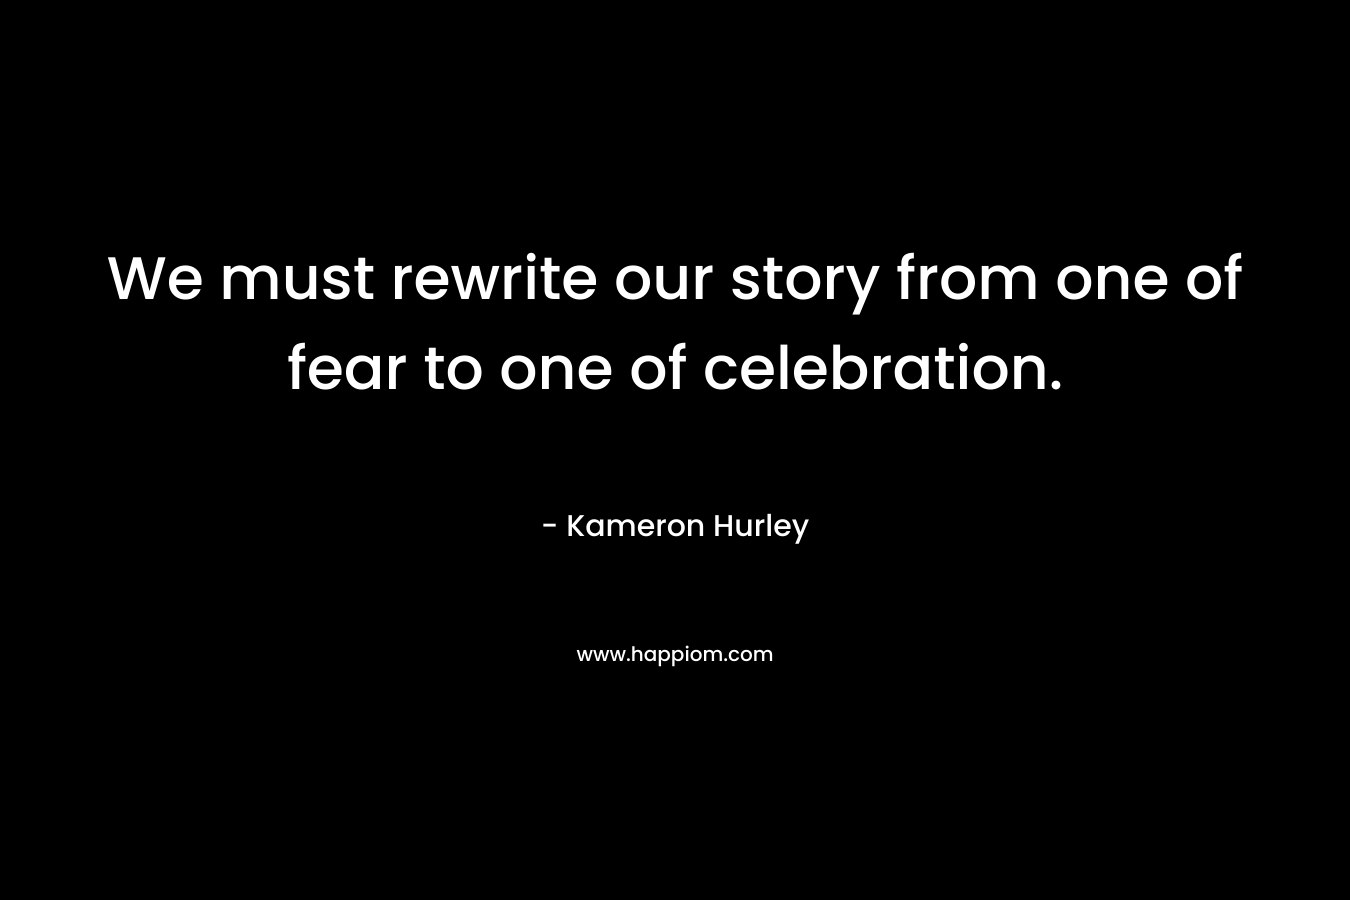 We must rewrite our story from one of fear to one of celebration. – Kameron Hurley